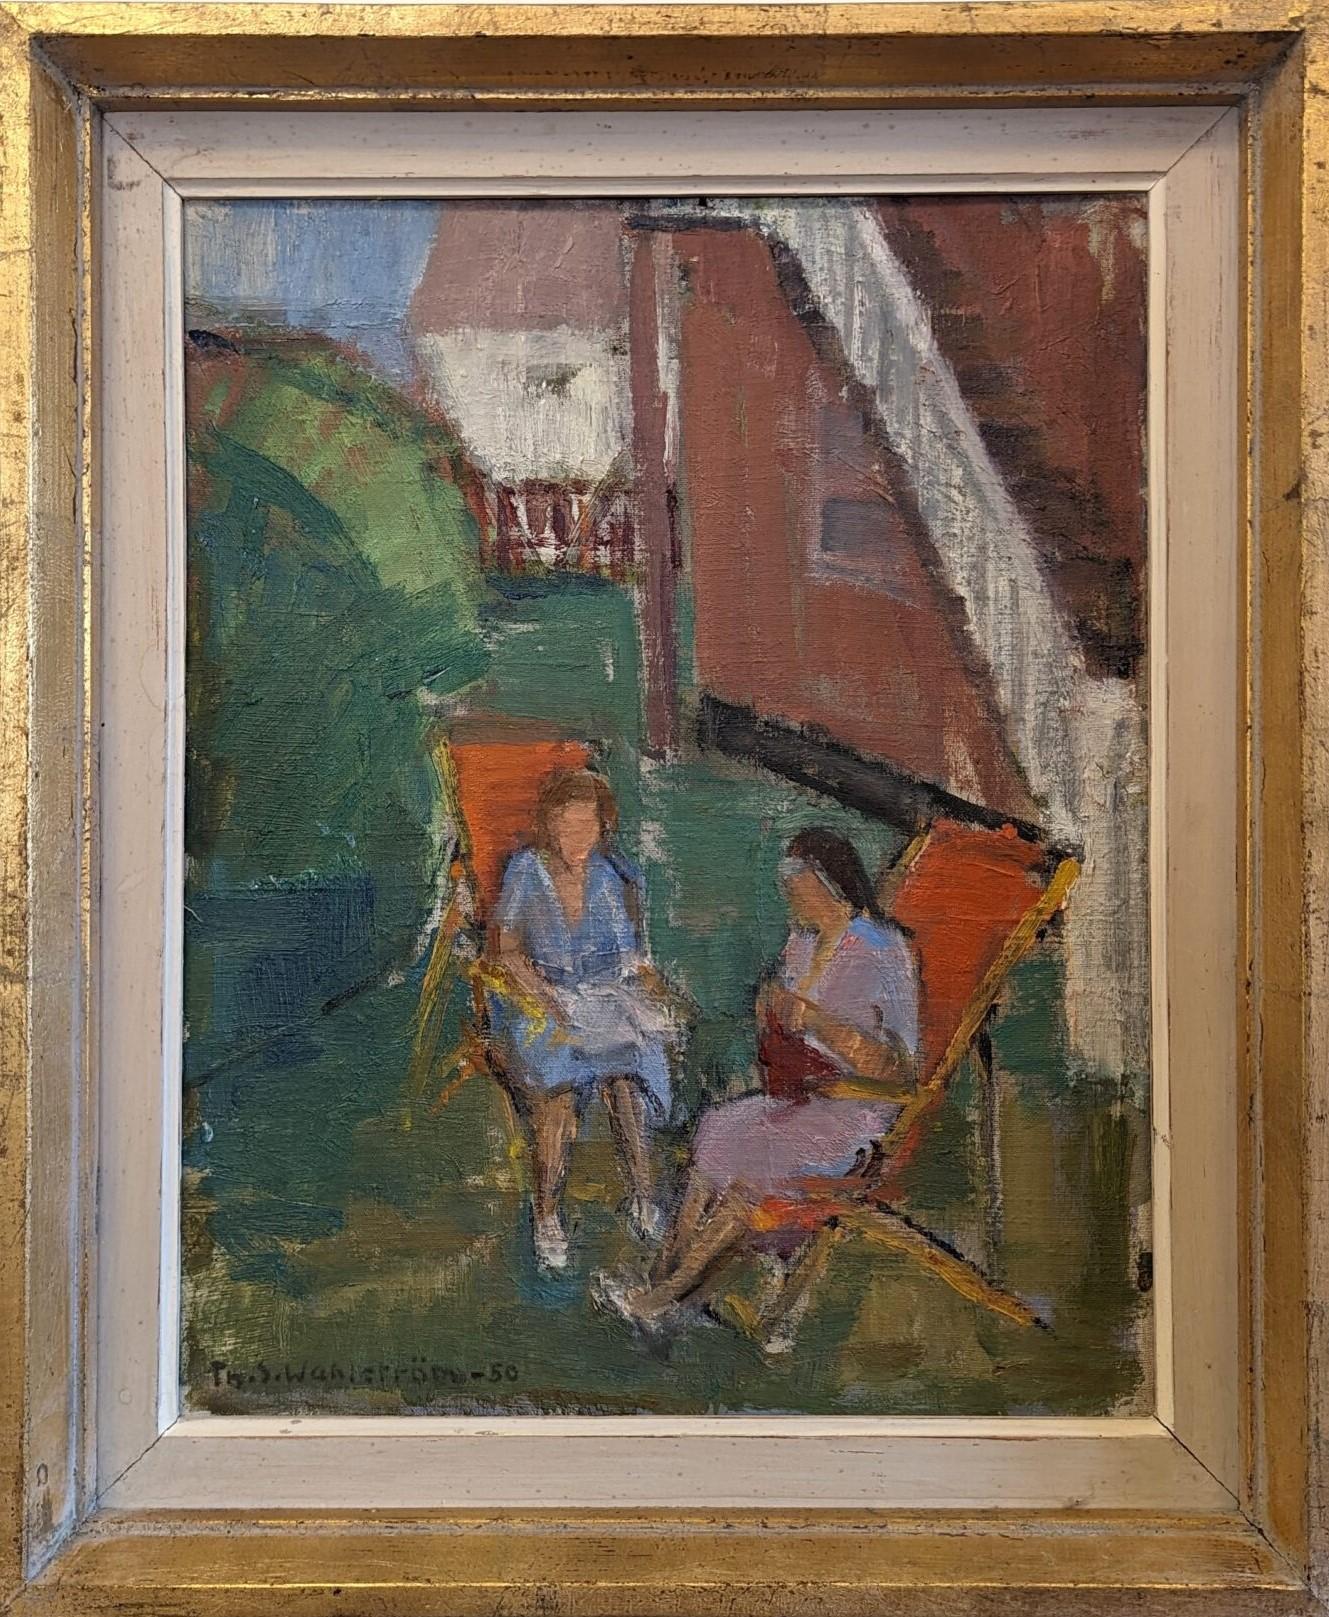 Unknown Figurative Painting - Vintage Mid-Century Swedish Framed Oil Painting - Crocheting in the Garden